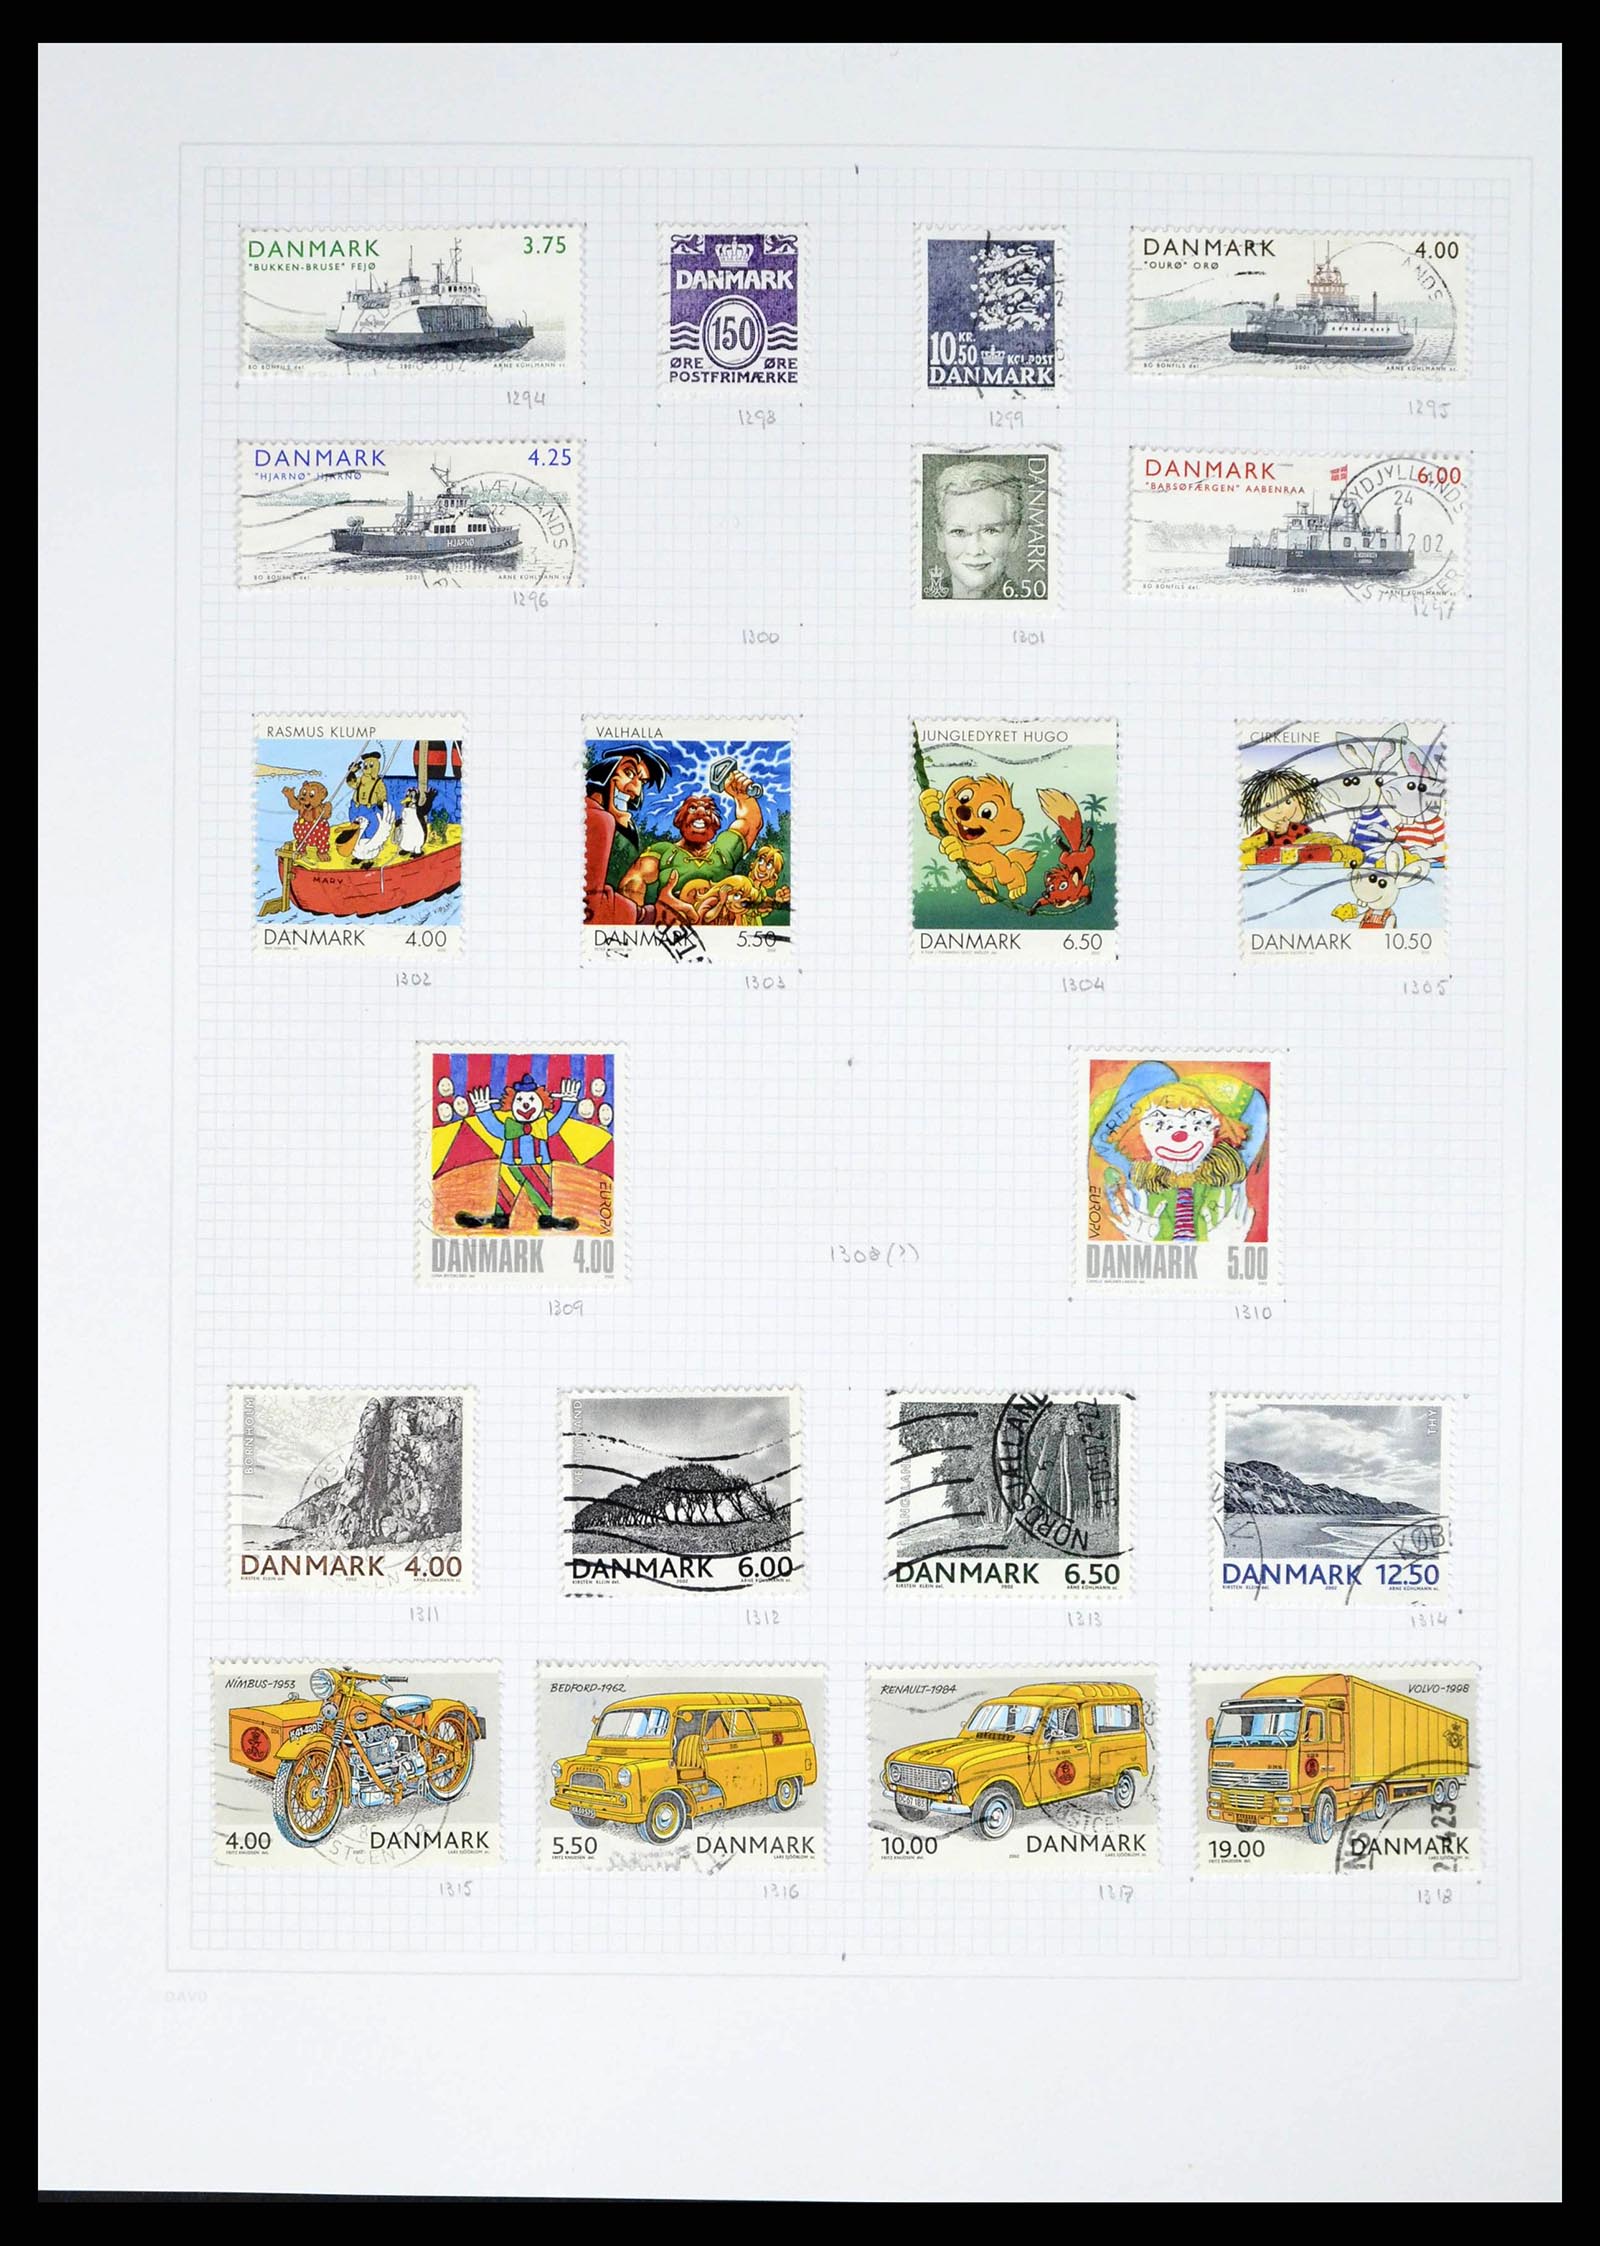 38156 0050 - Stamp collection 38156 Denmark 1851-2013.